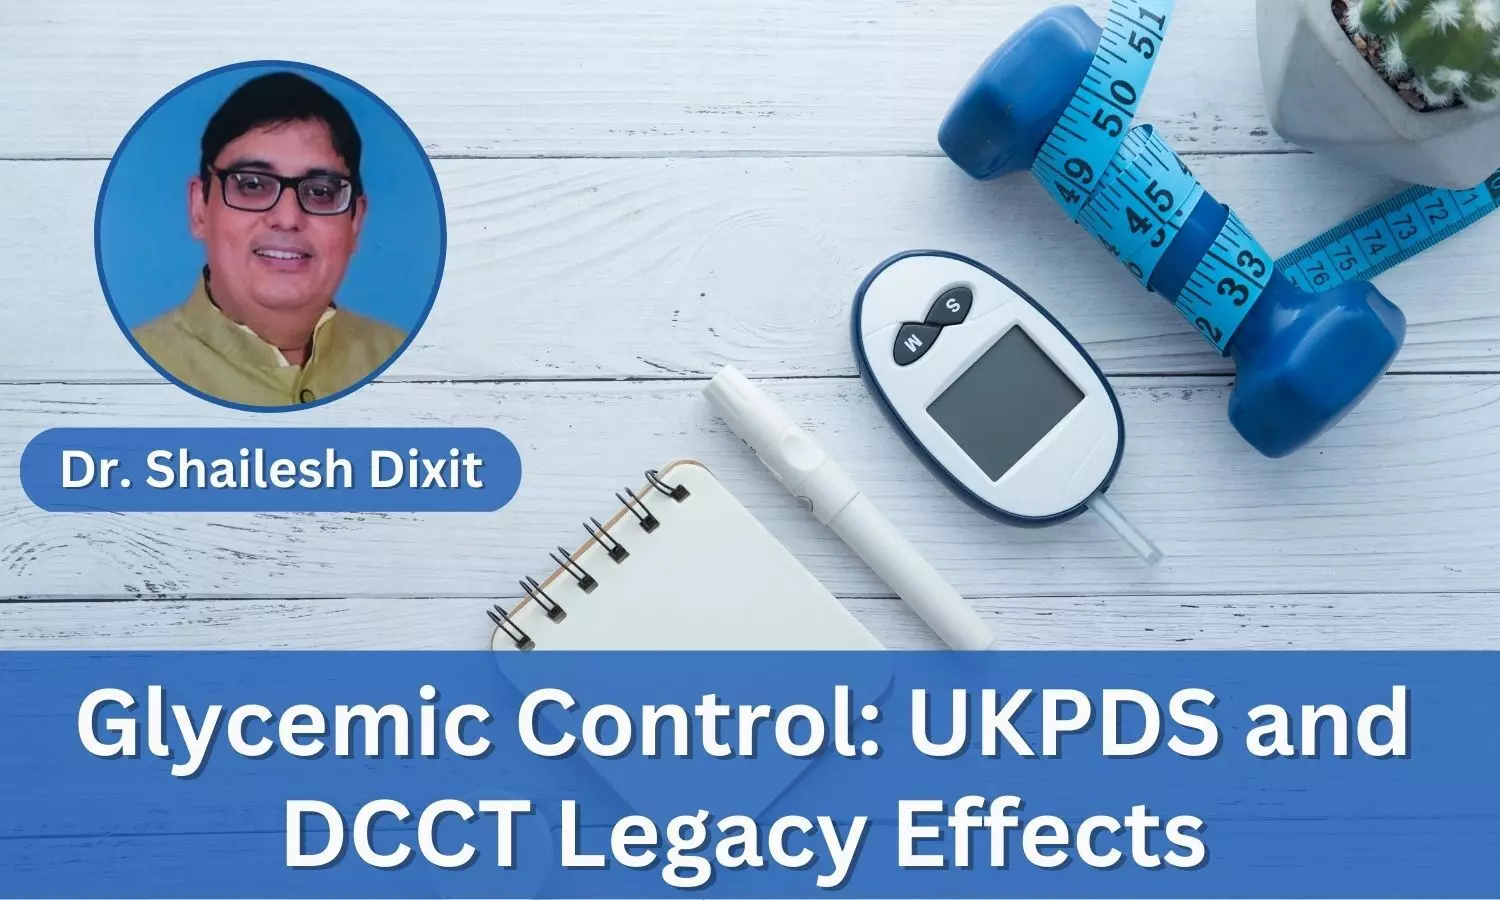 UKPDS and DCCT Legacy Effects: Importance of Early Treatment of Hyperglycemia